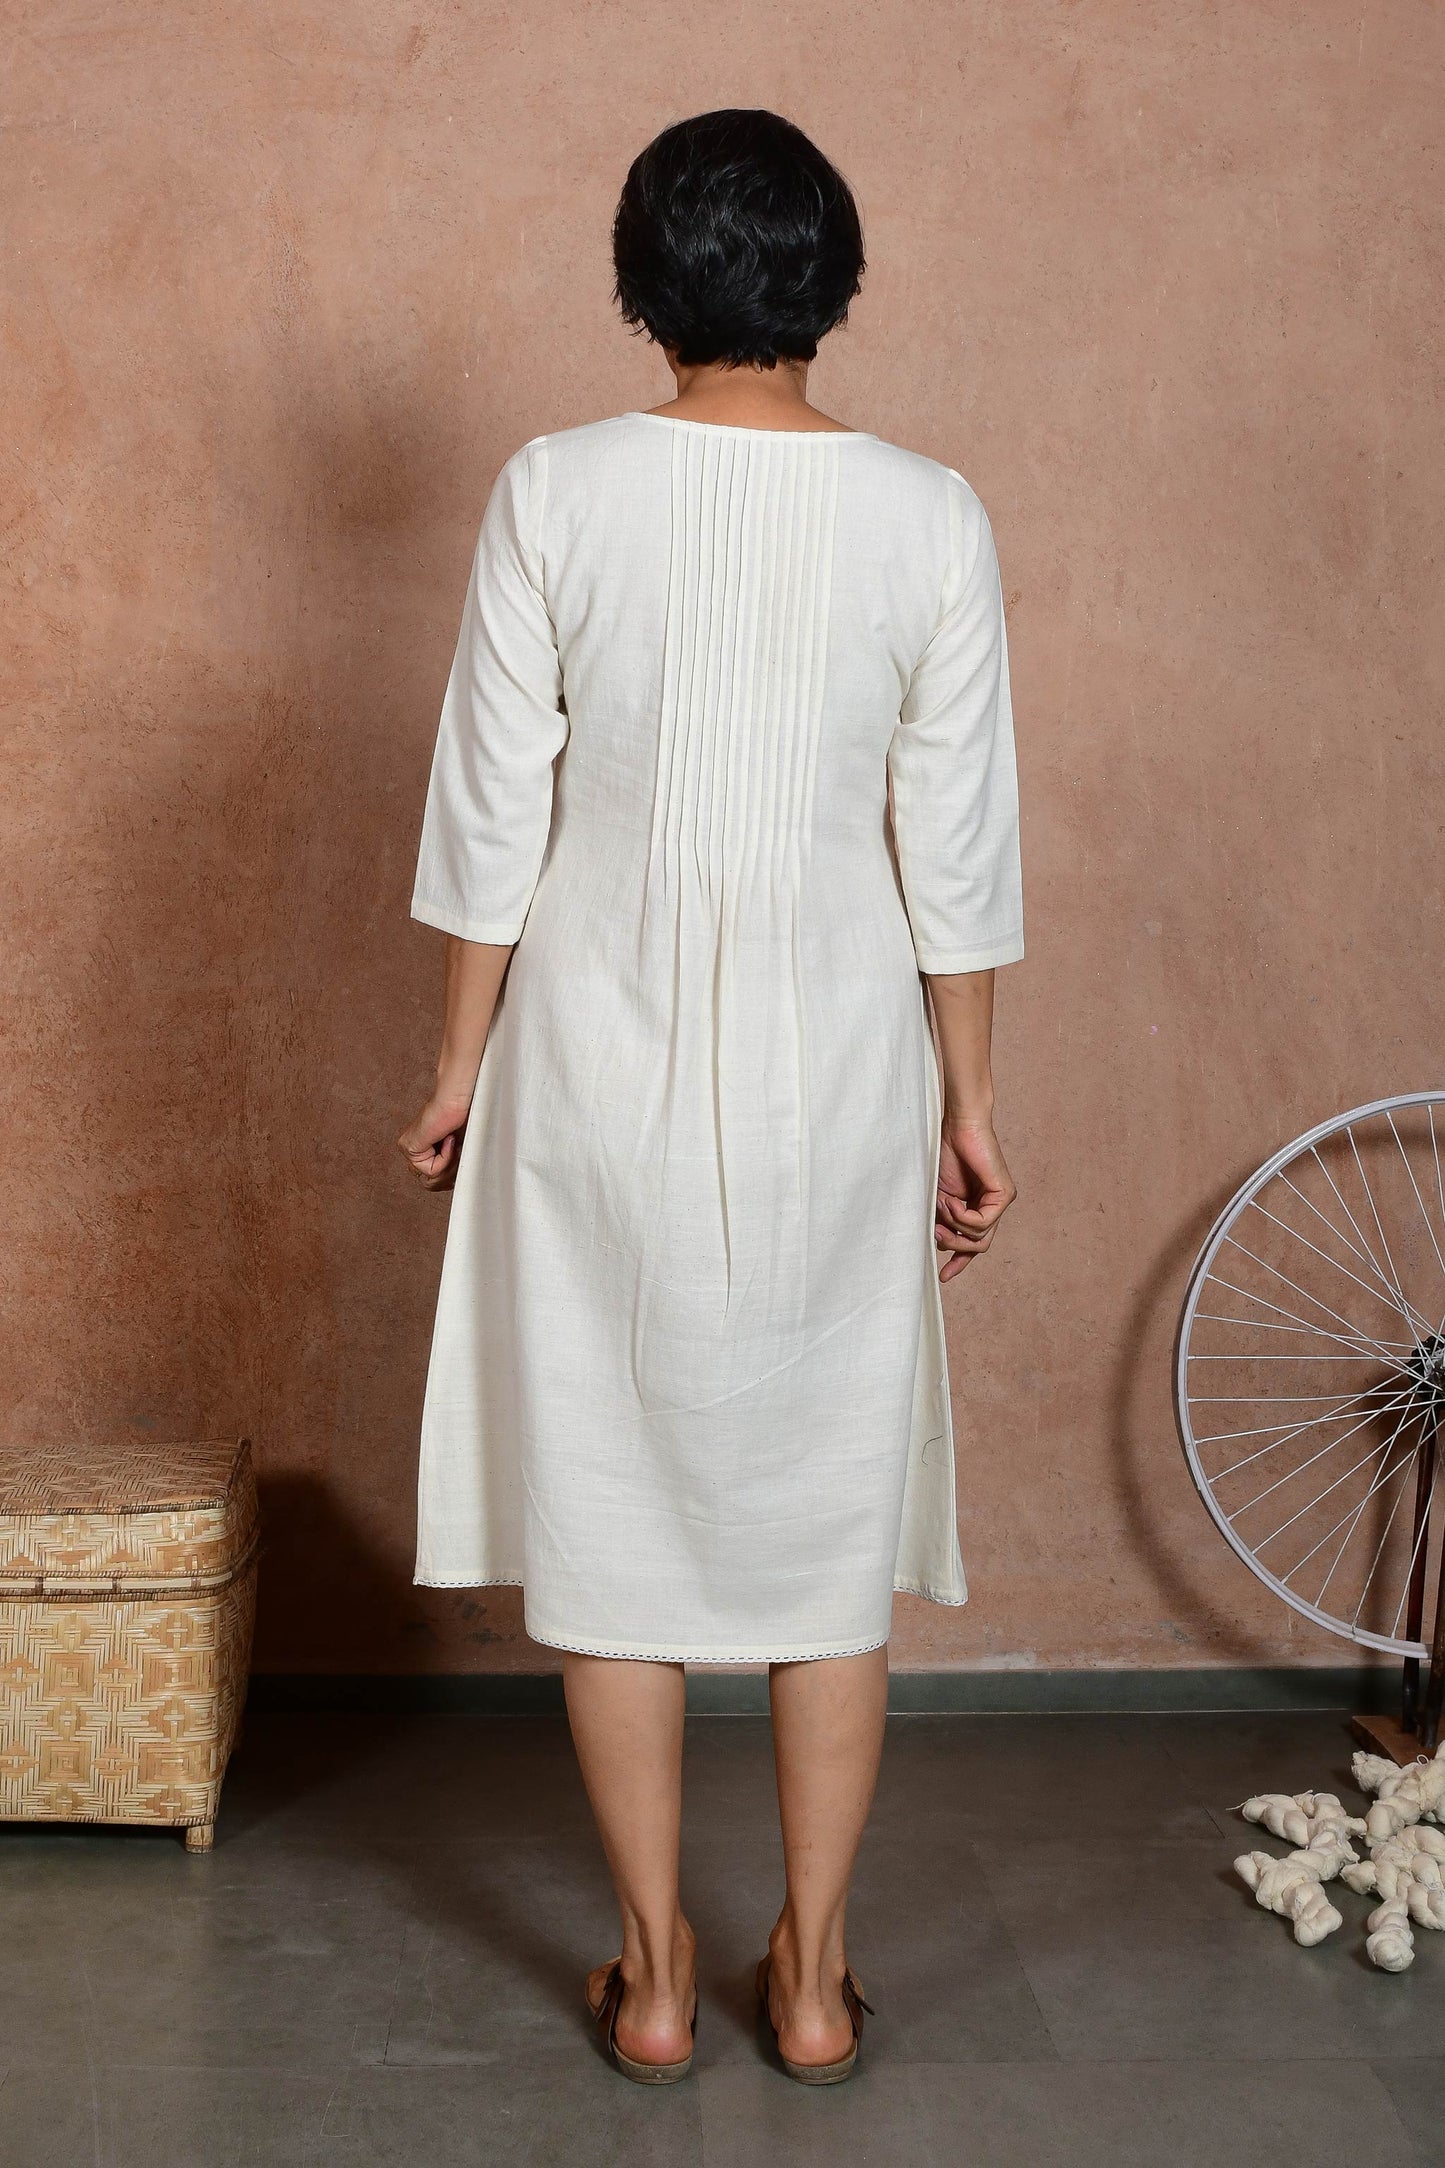 Back pose of a middle aged indian woman wearing an off white knee length dress with sleeves and knife pleat detail.